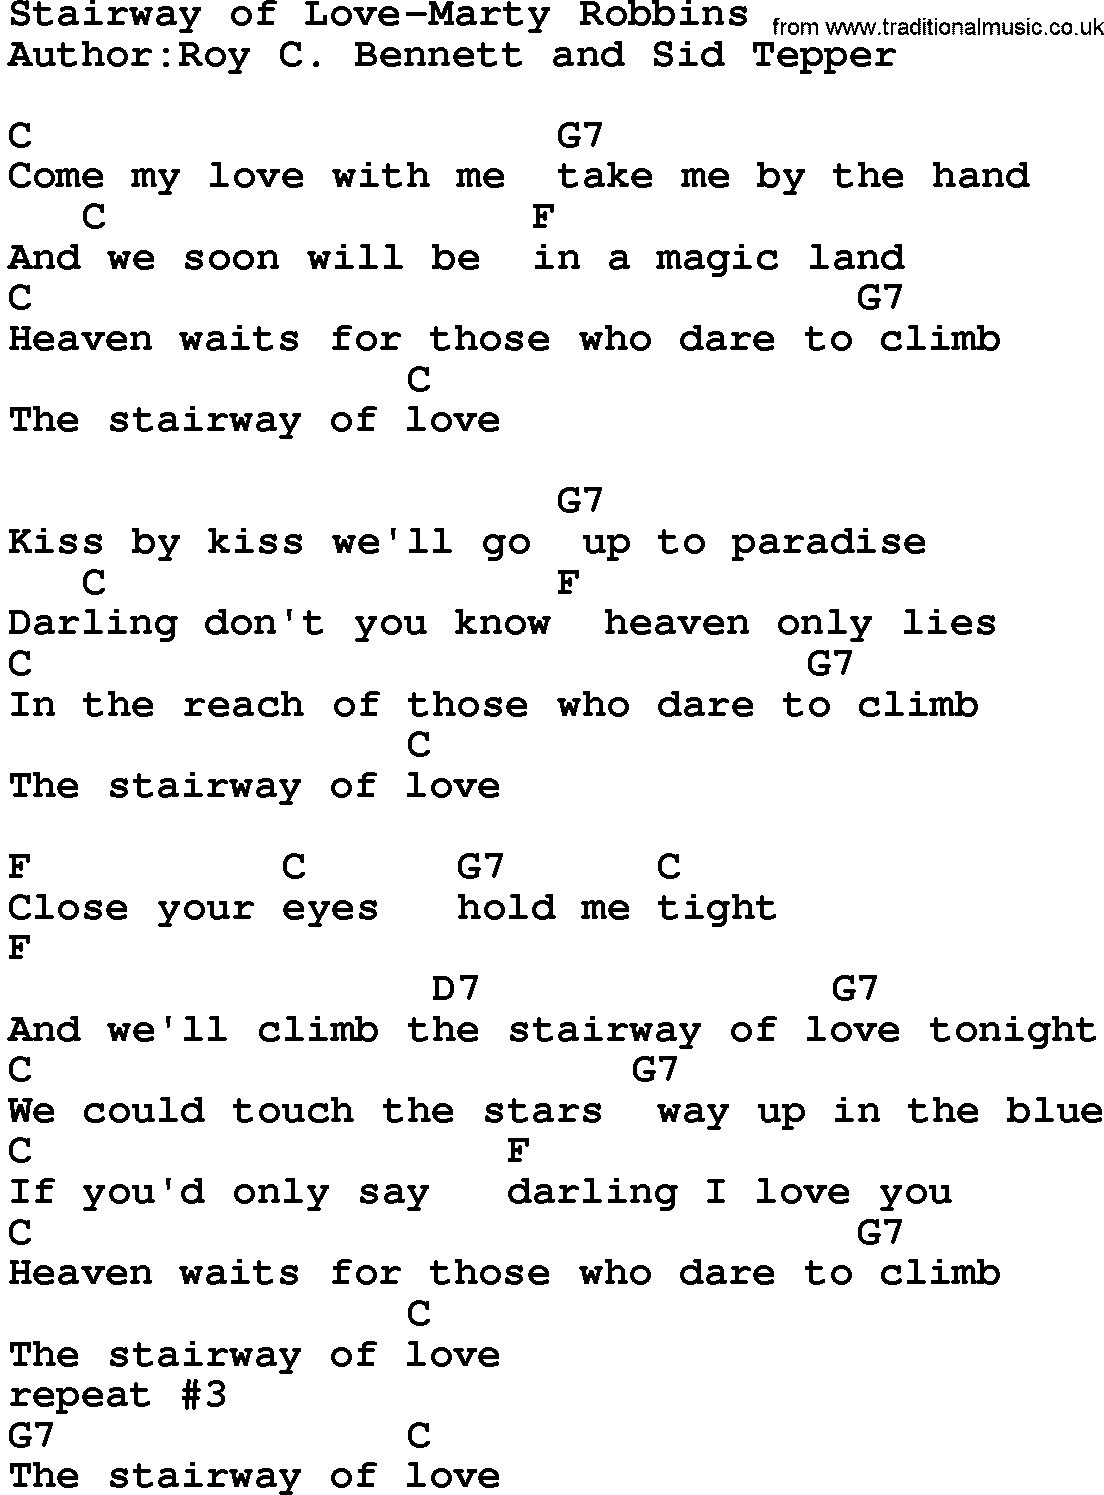 Country music song: Stairway Of Love-Marty Robbins lyrics and chords